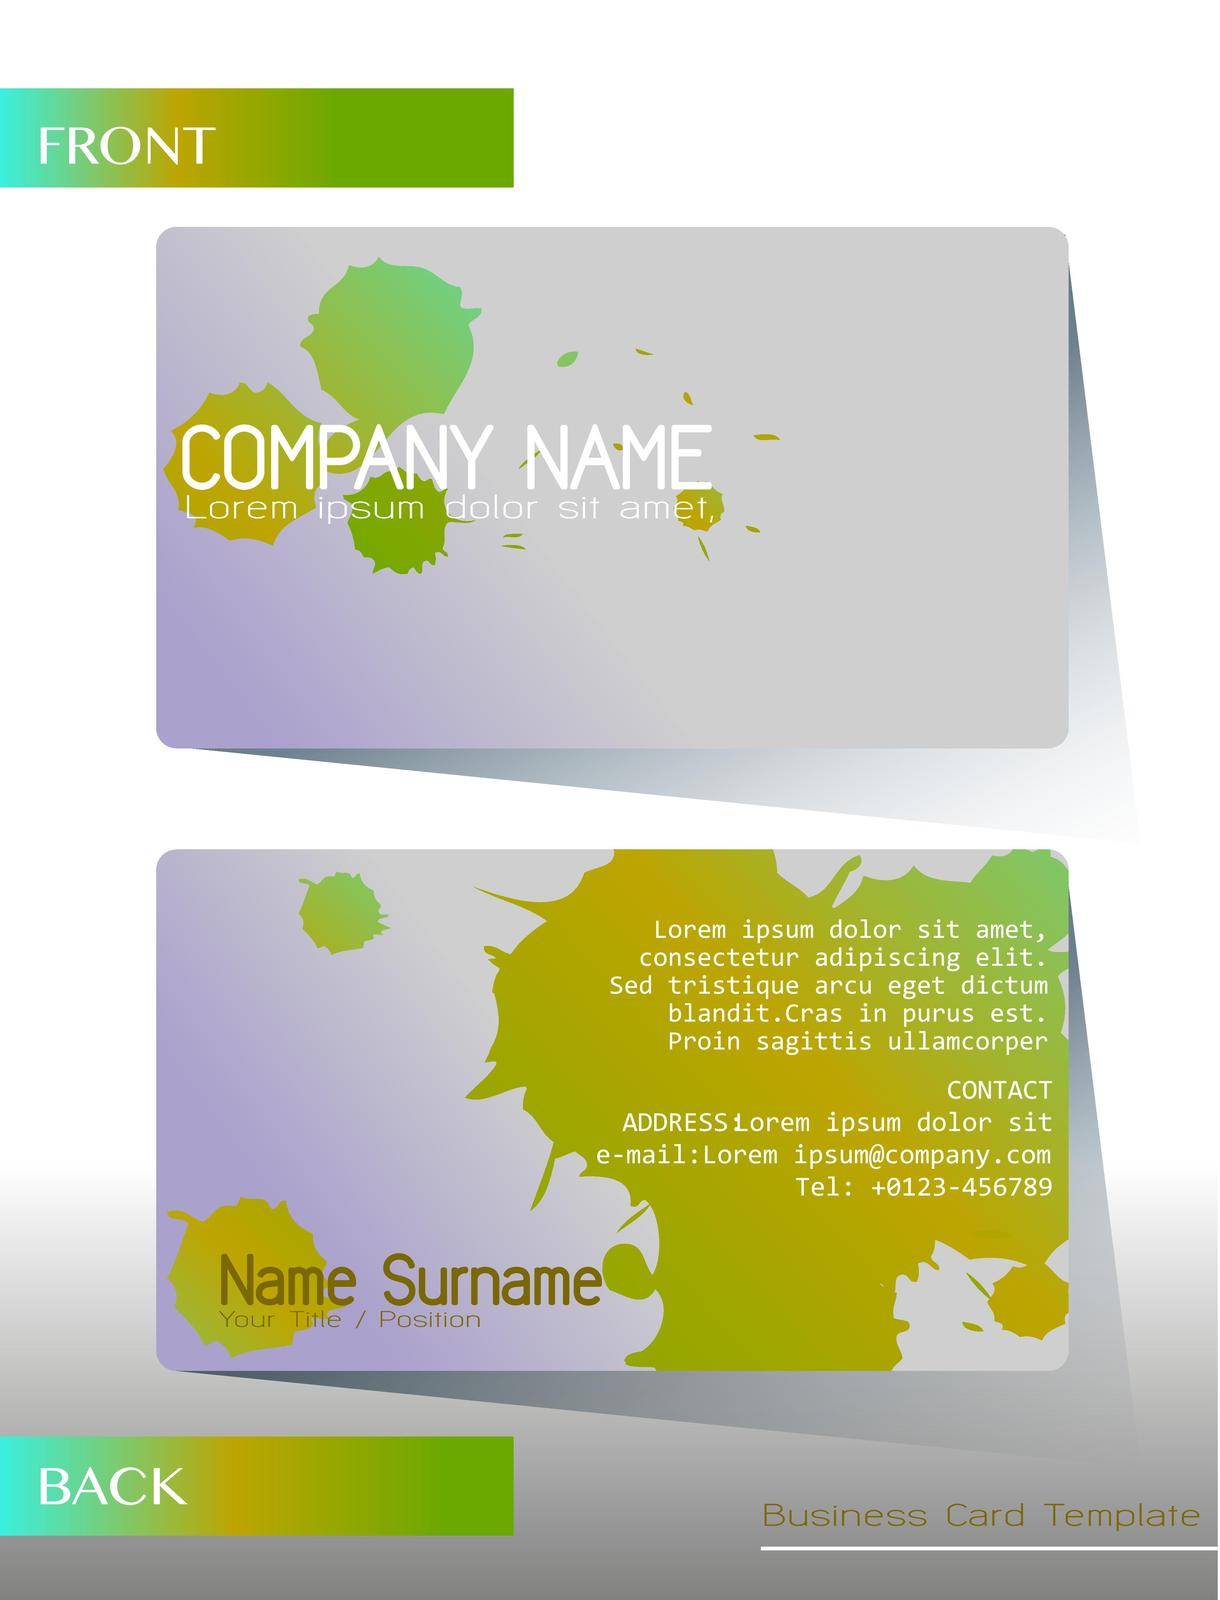 A business card by iimages